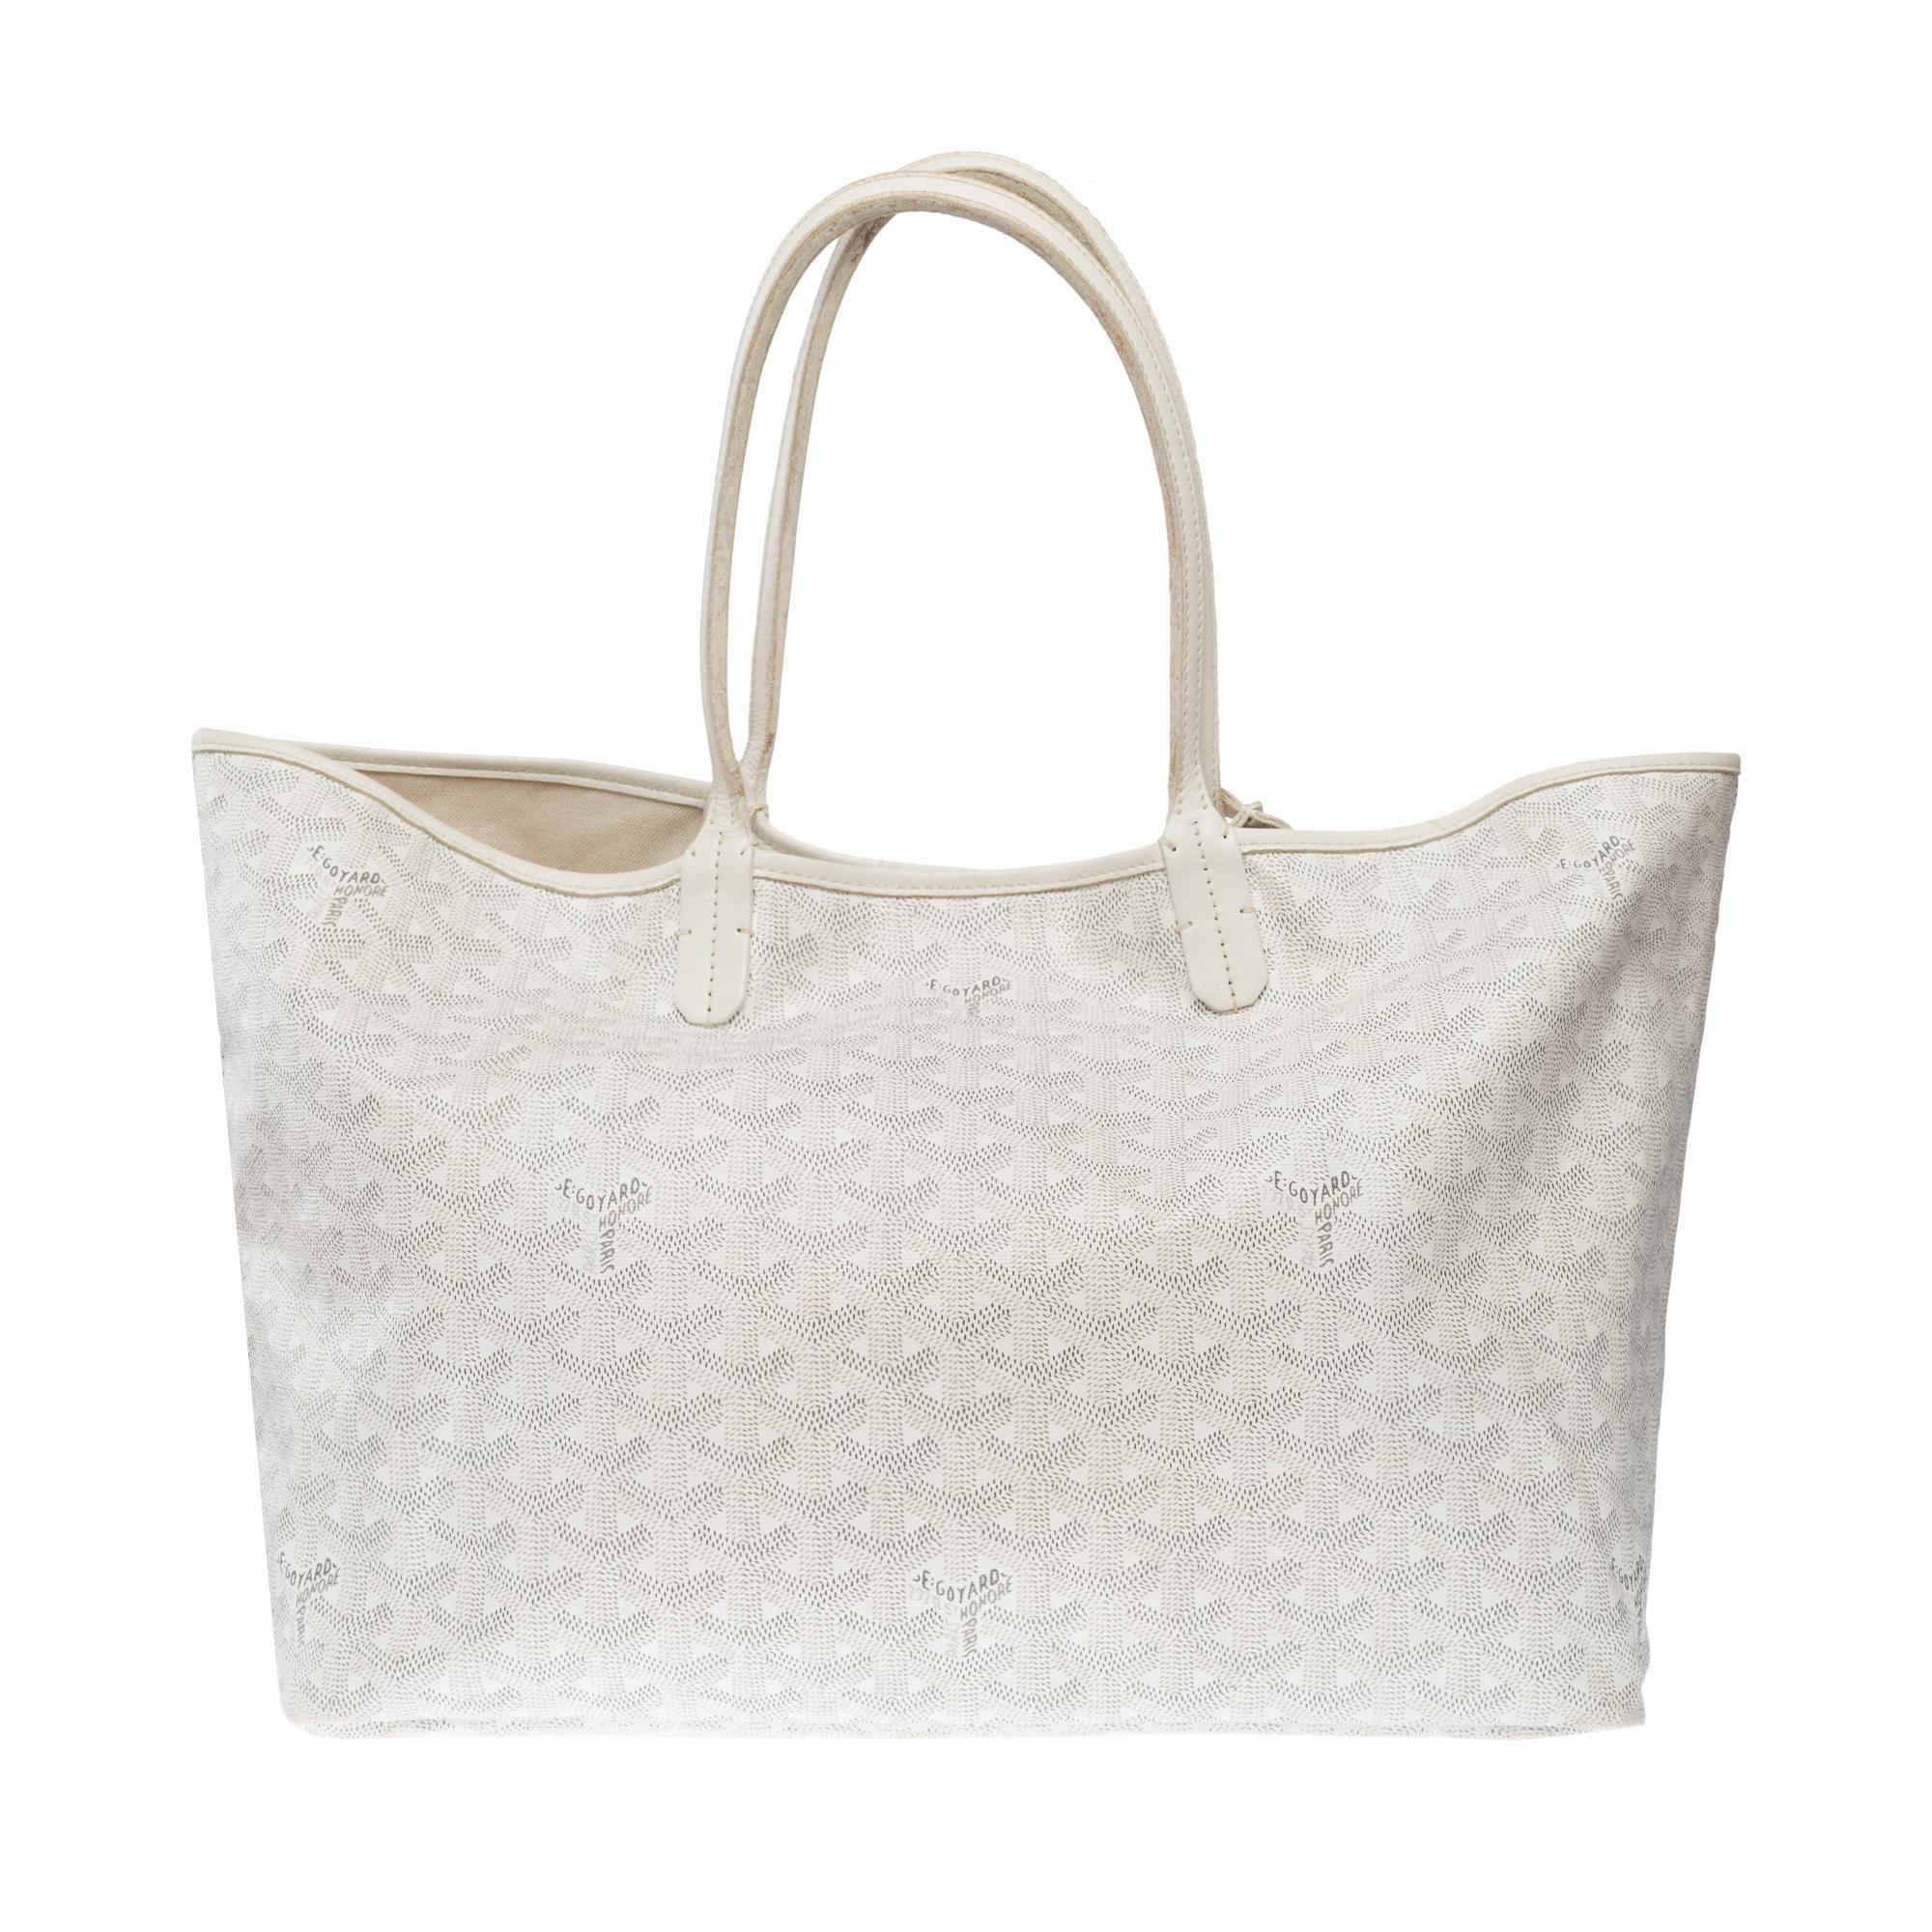 Women's The Coveted Goyard Saint-Louis PM Tote bag in White canvas and leather, SHW For Sale